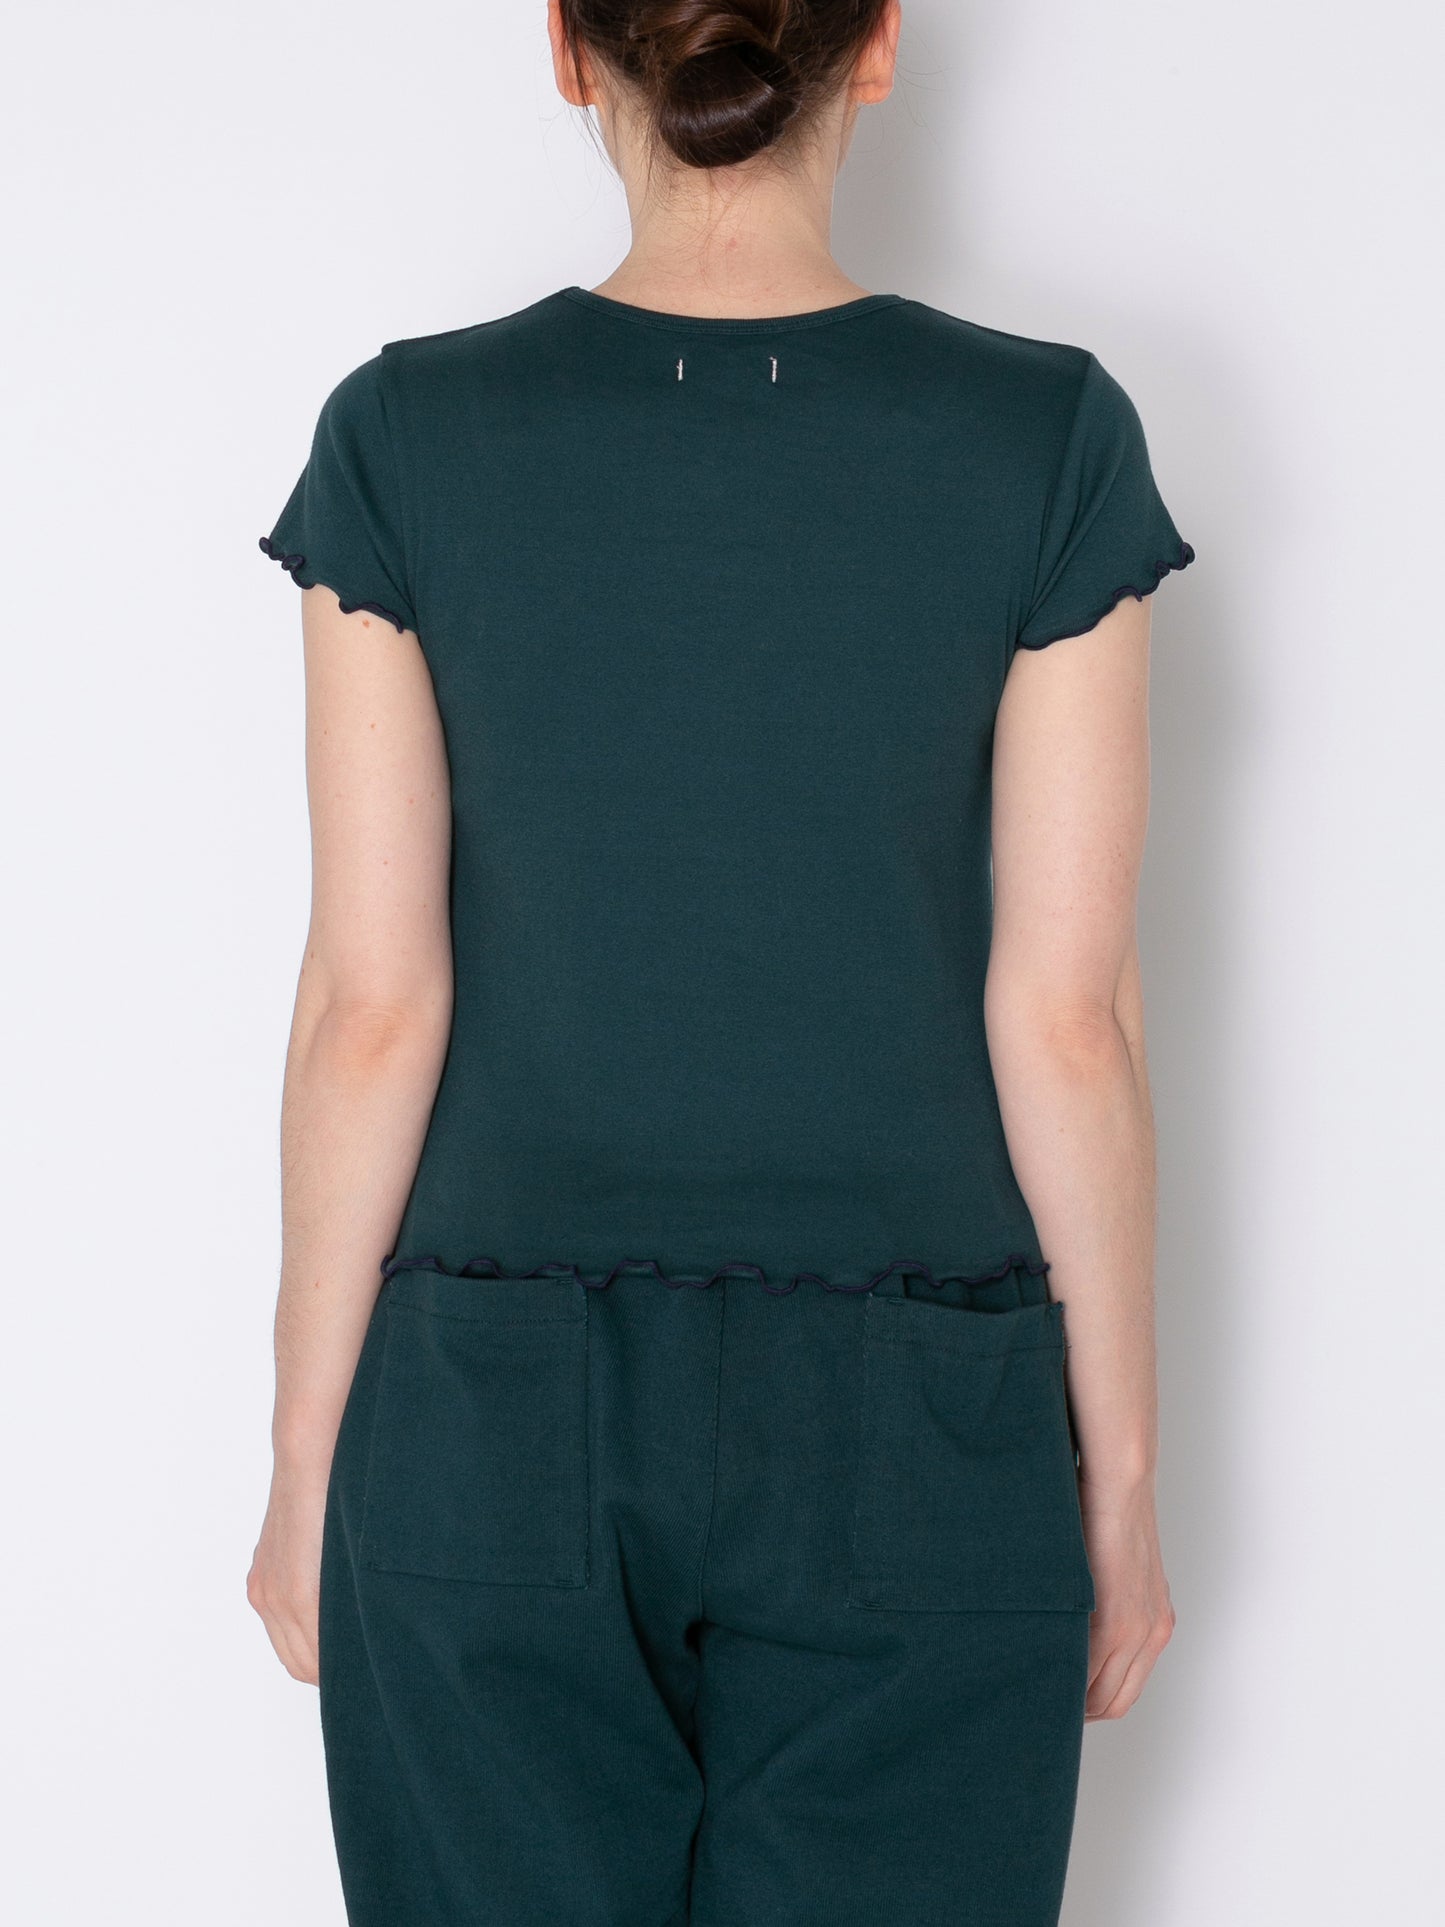 LOVER S/S TEE ORGANIC COTTON STRETCH JERSEY AM-C0011 Forest